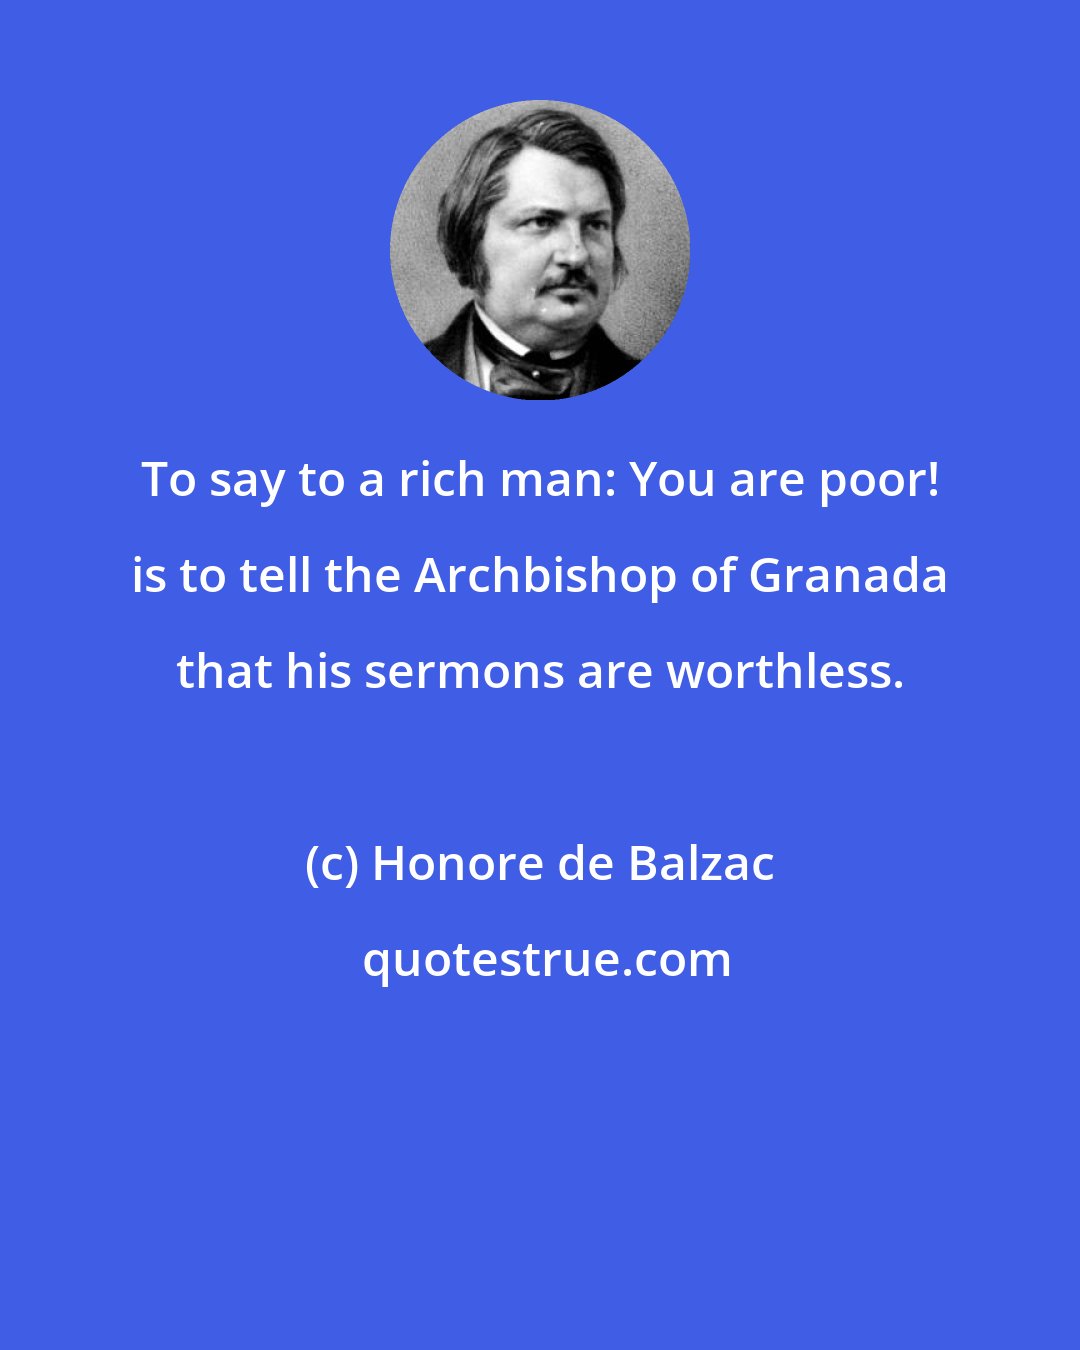 Honore de Balzac: To say to a rich man: You are poor! is to tell the Archbishop of Granada that his sermons are worthless.